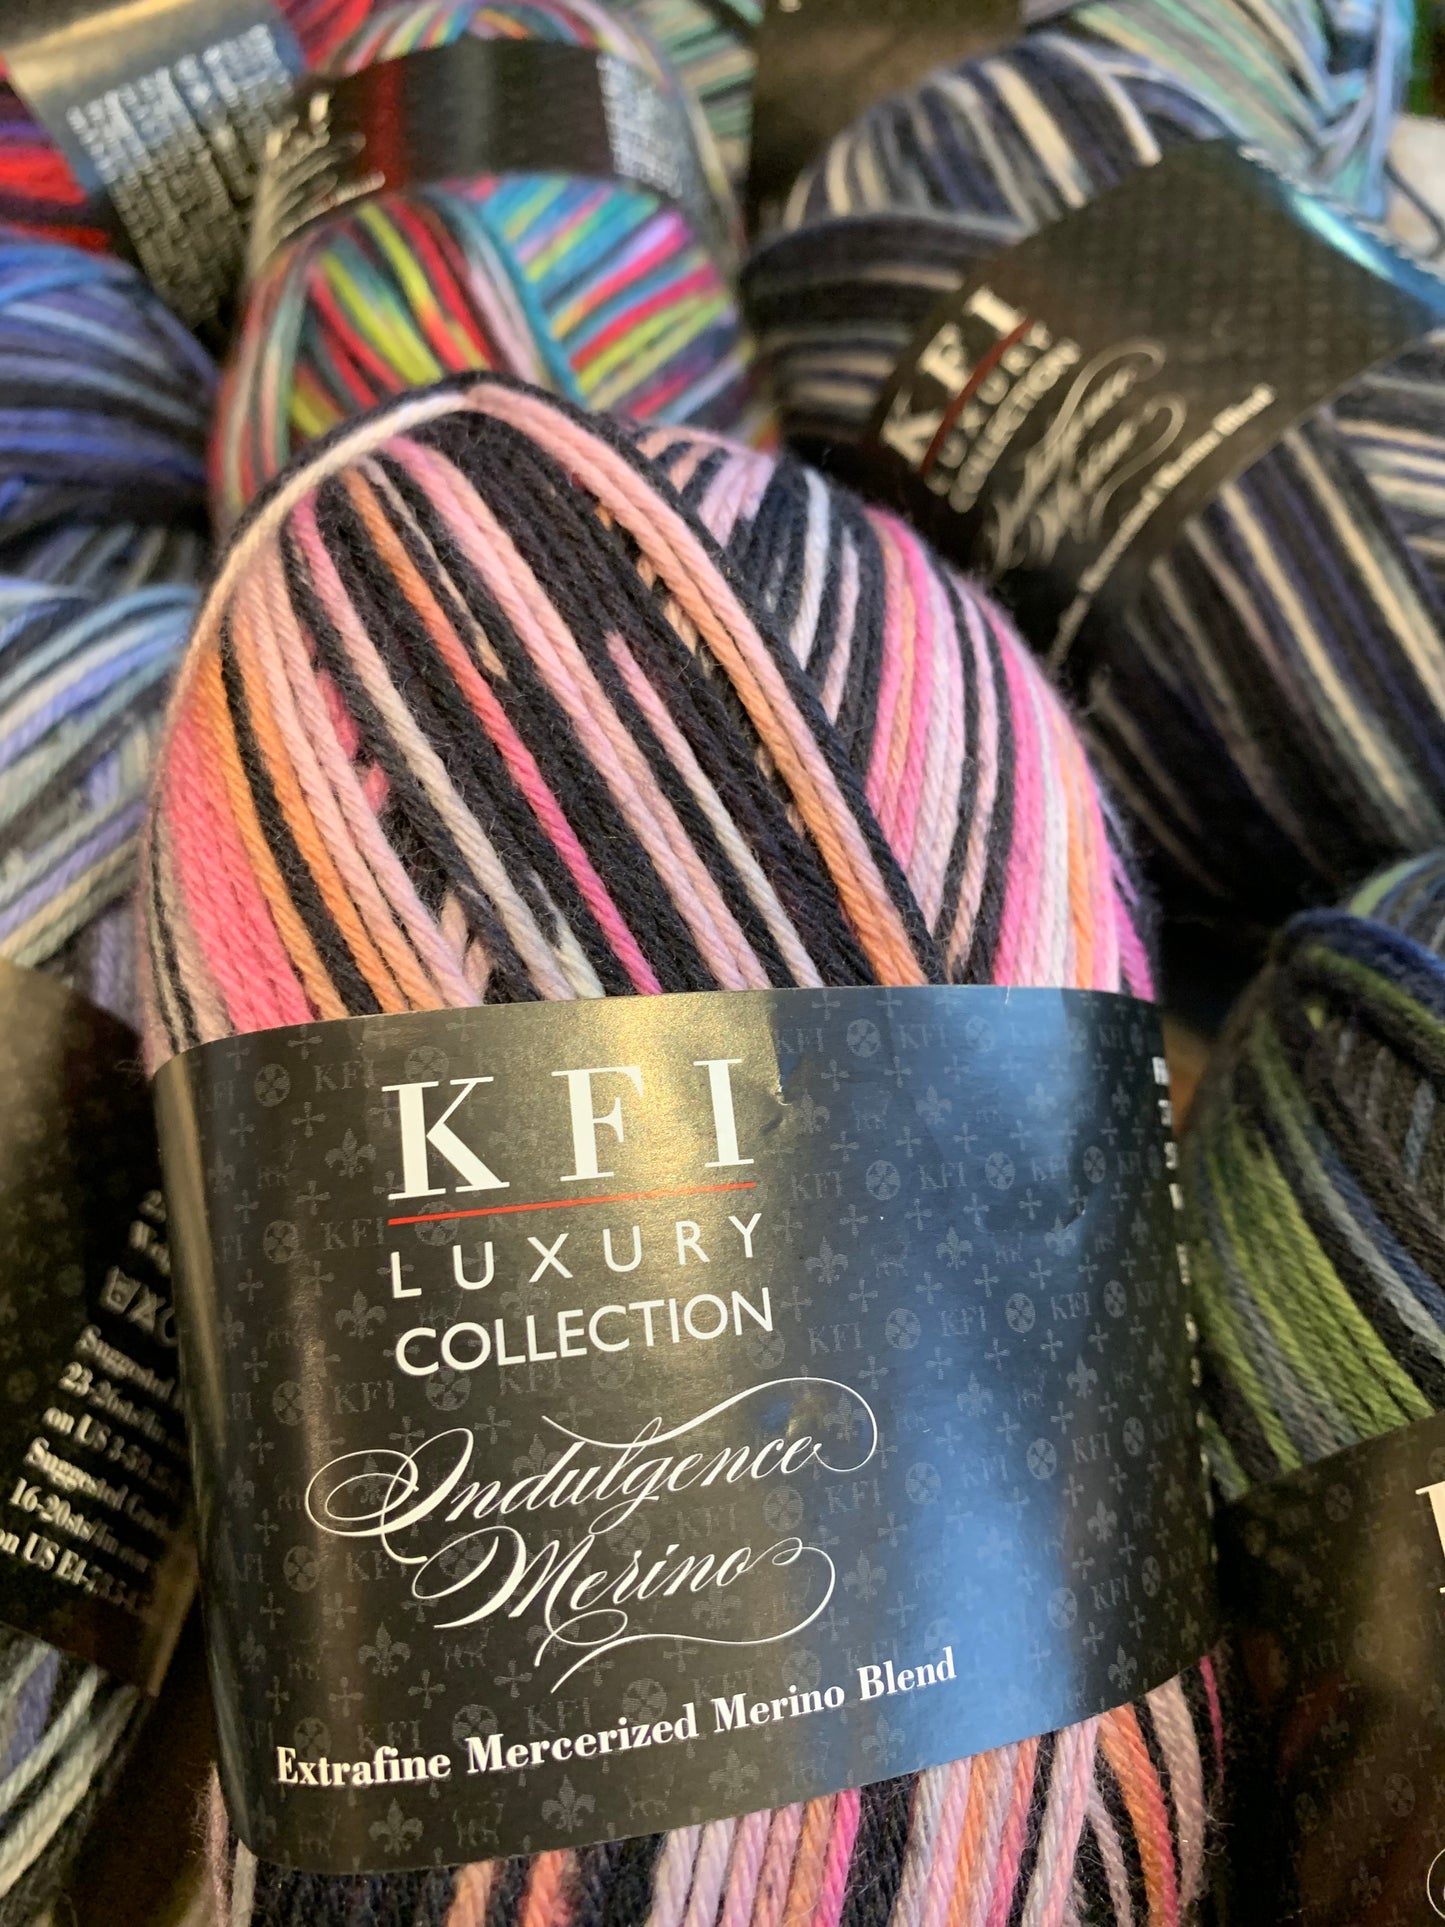 KFI - Luxury Collection - Indulgence Merino - DK pour chaussettes